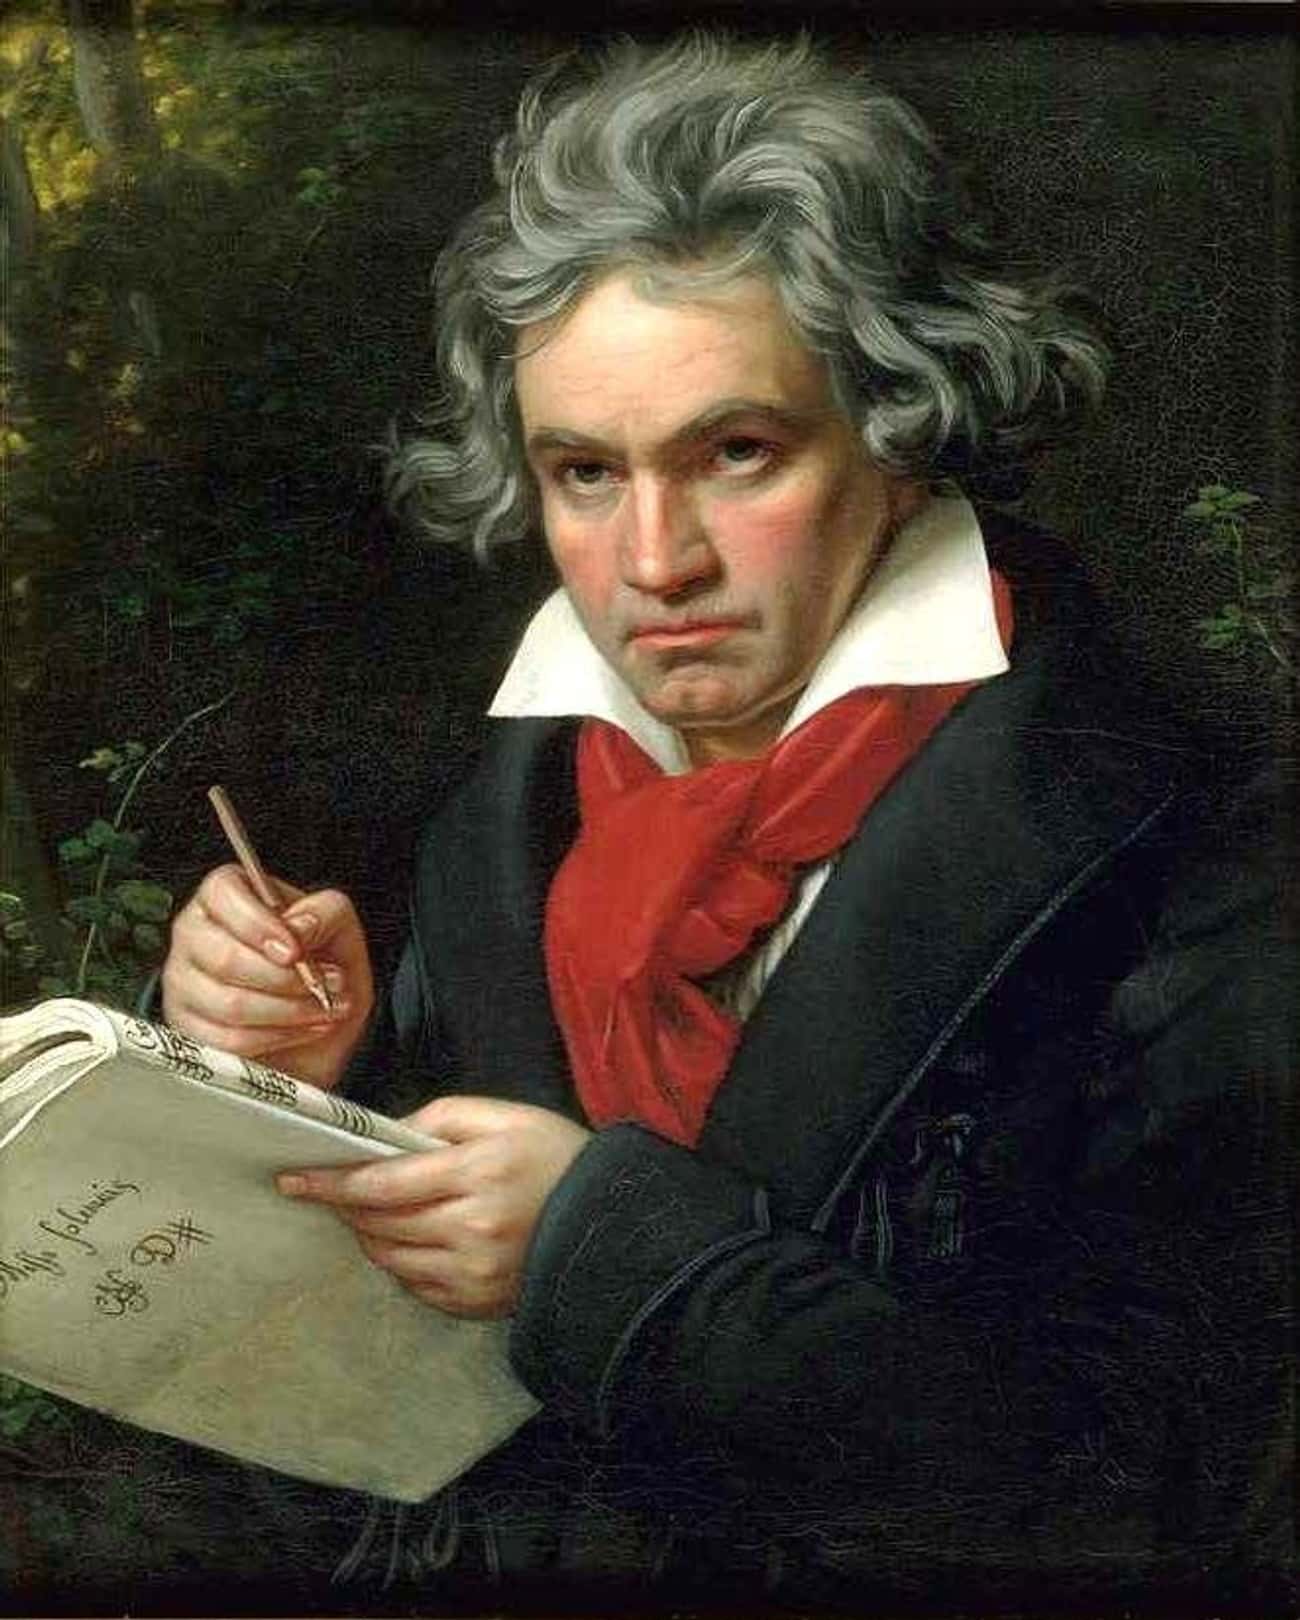 Ludwig van Beethoven Had A Lot Of Physical Problems Possibly Related To Syphilis